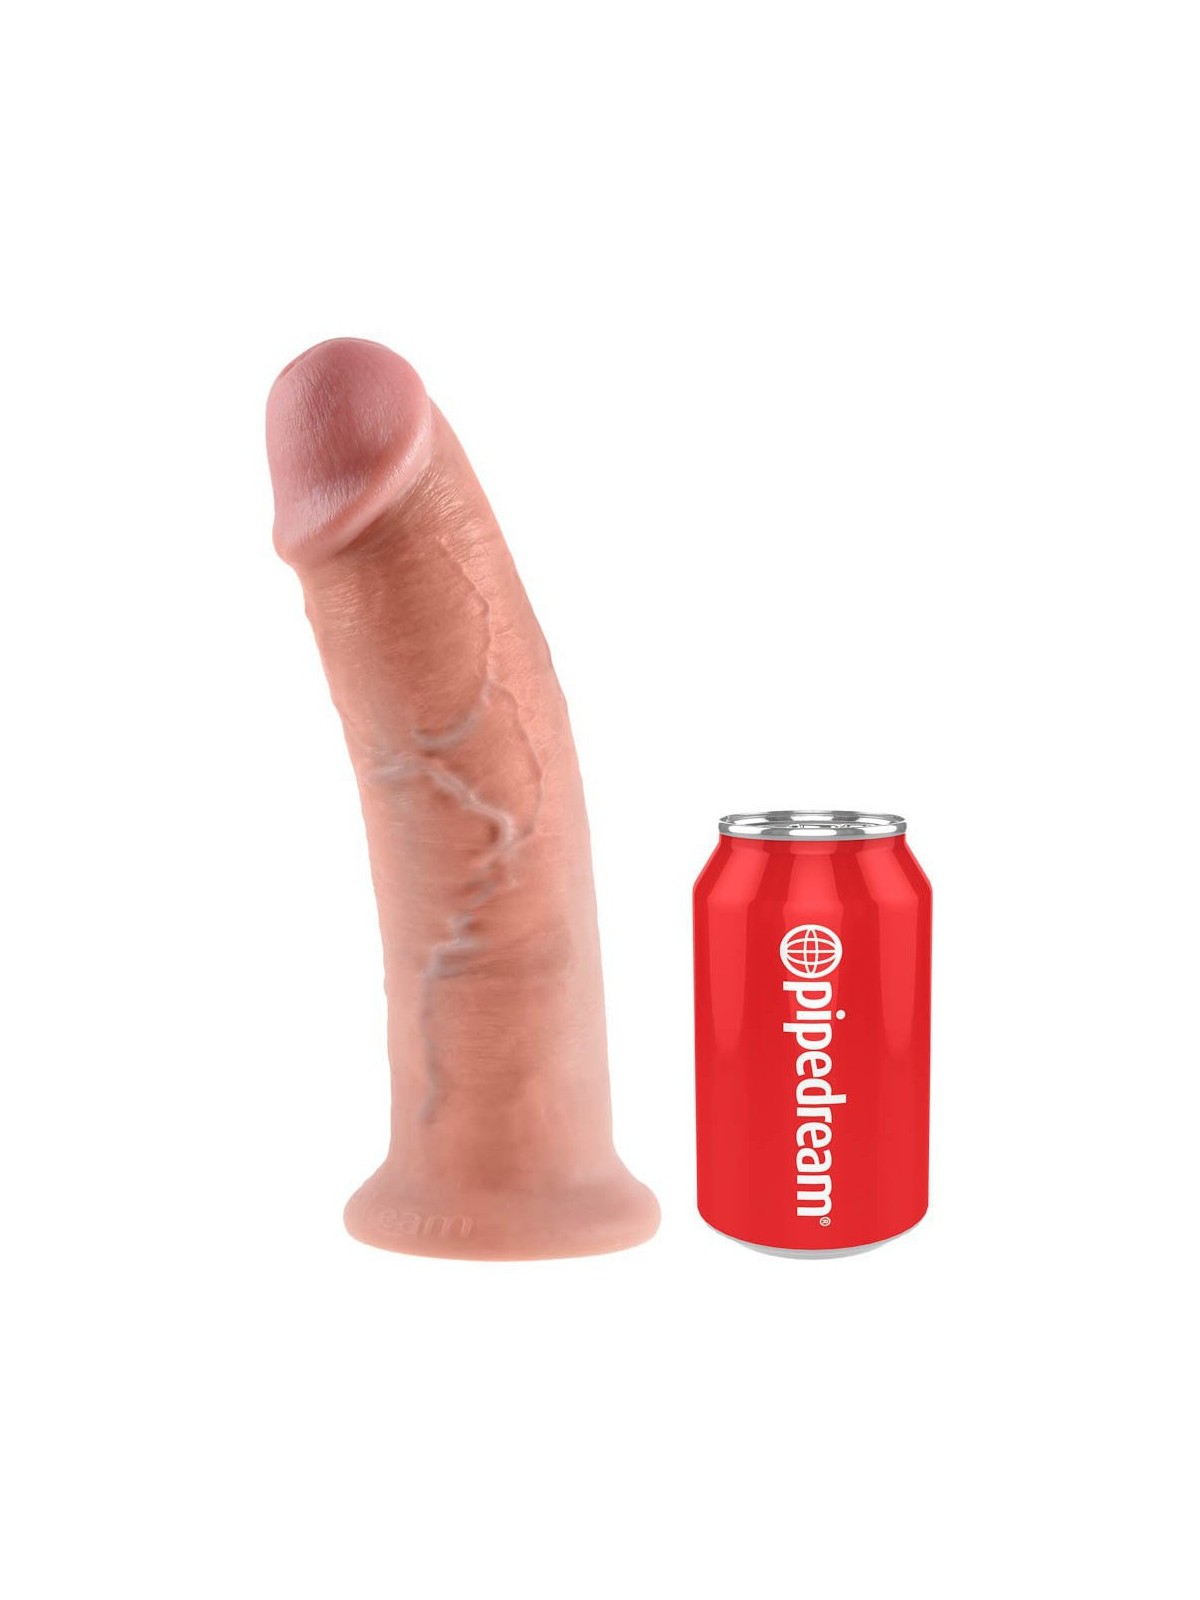 Realistic gods Realistic Gode XL King Cock 25 x 6 cm Here is an XL dildo of the brand King Cock that we offer you on gay sexshop